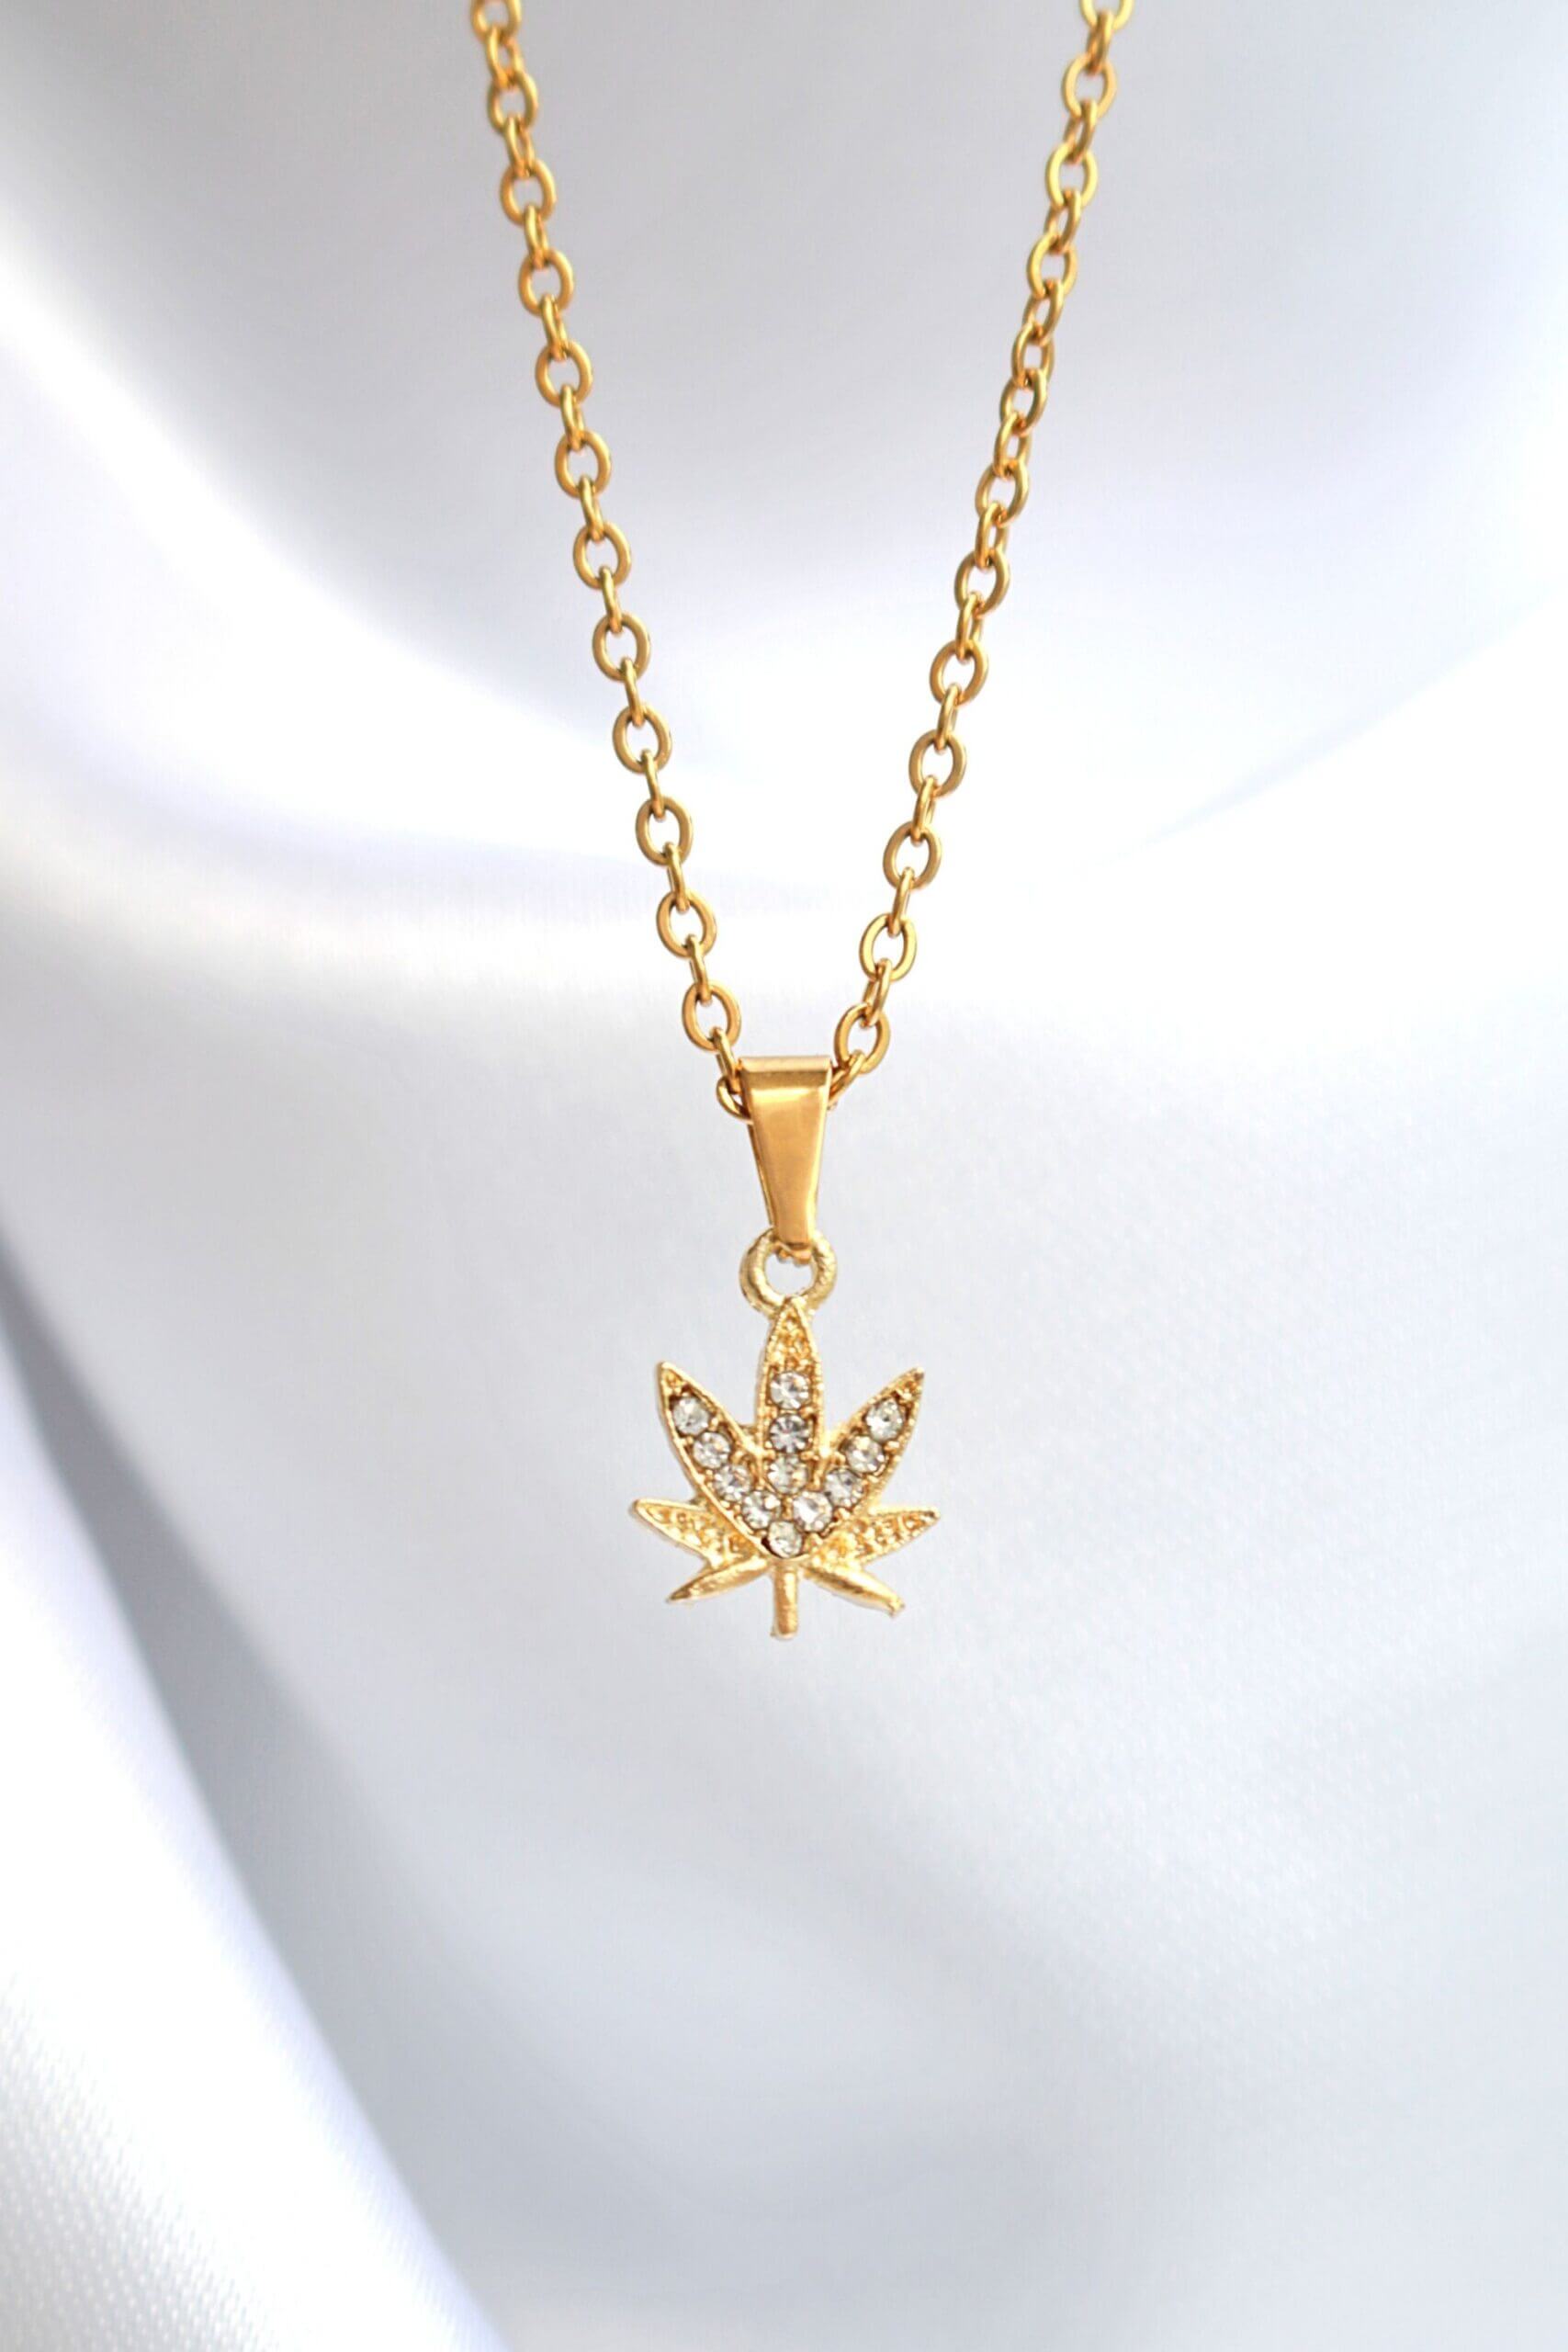 24K Gold-Plated Cannabis Leaf Necklace with Cubic Zirconia Inlay - Handcrafted in Europe Bijou Her